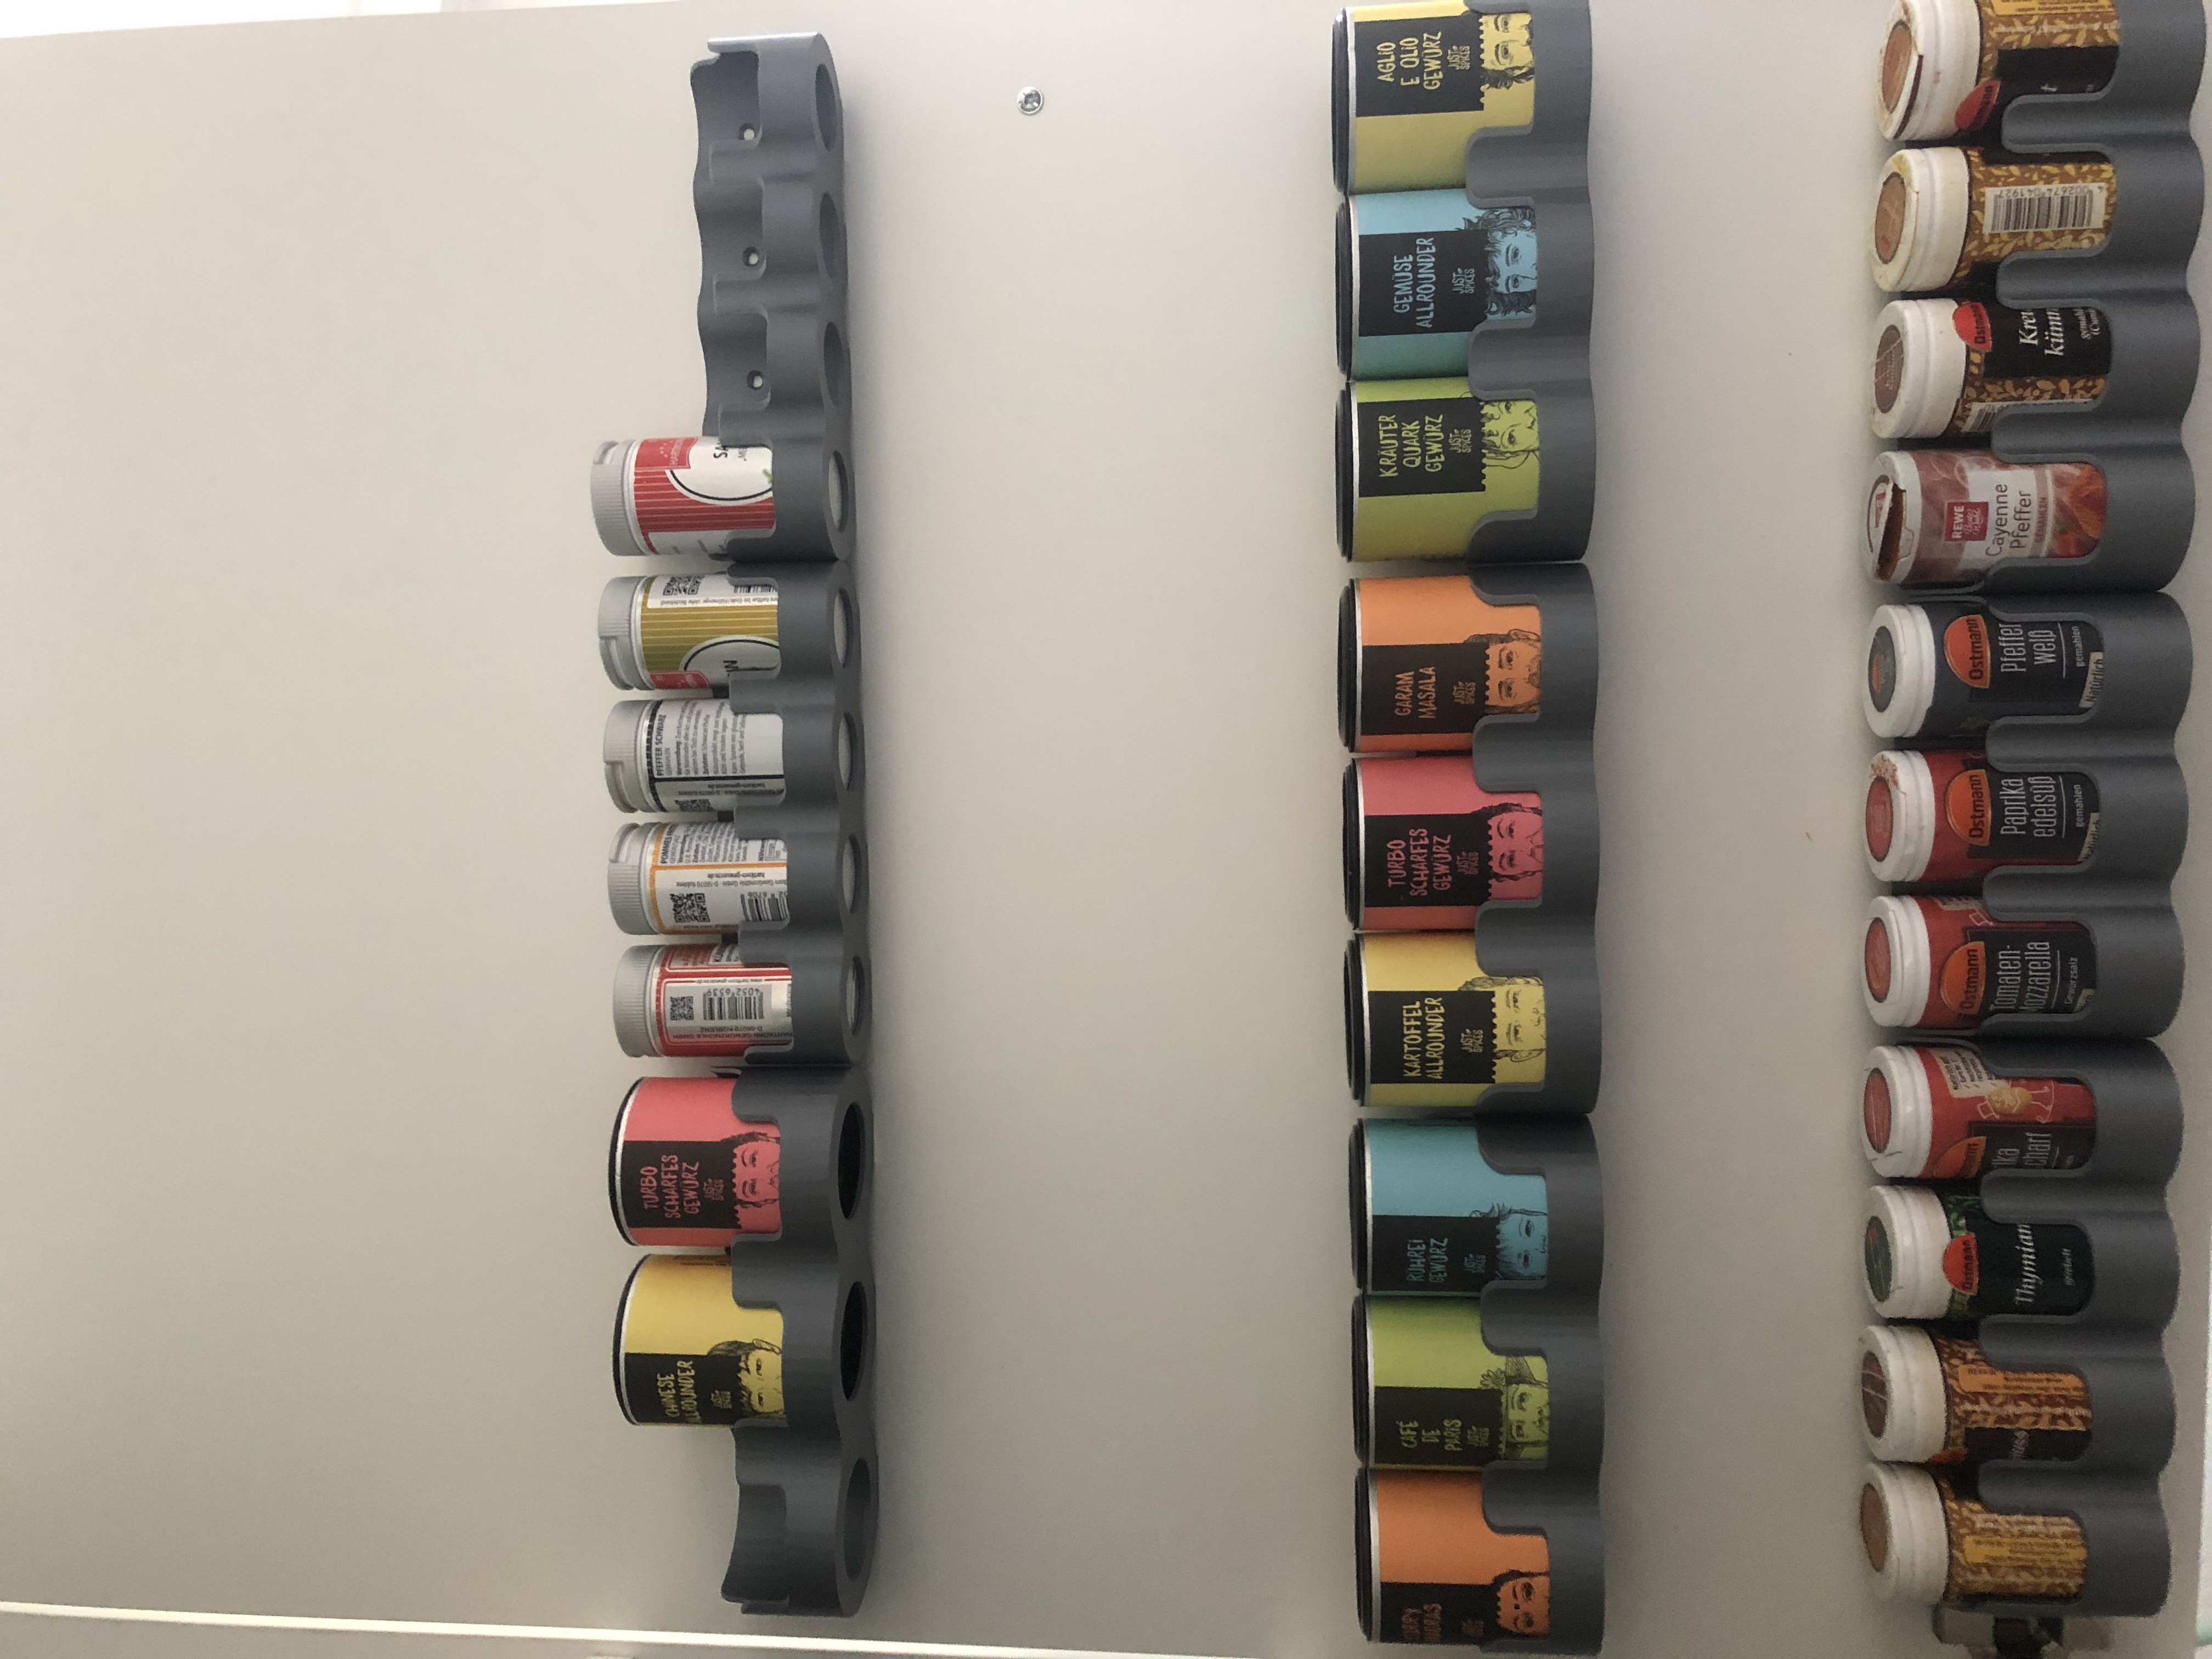 Spice rack for just spices